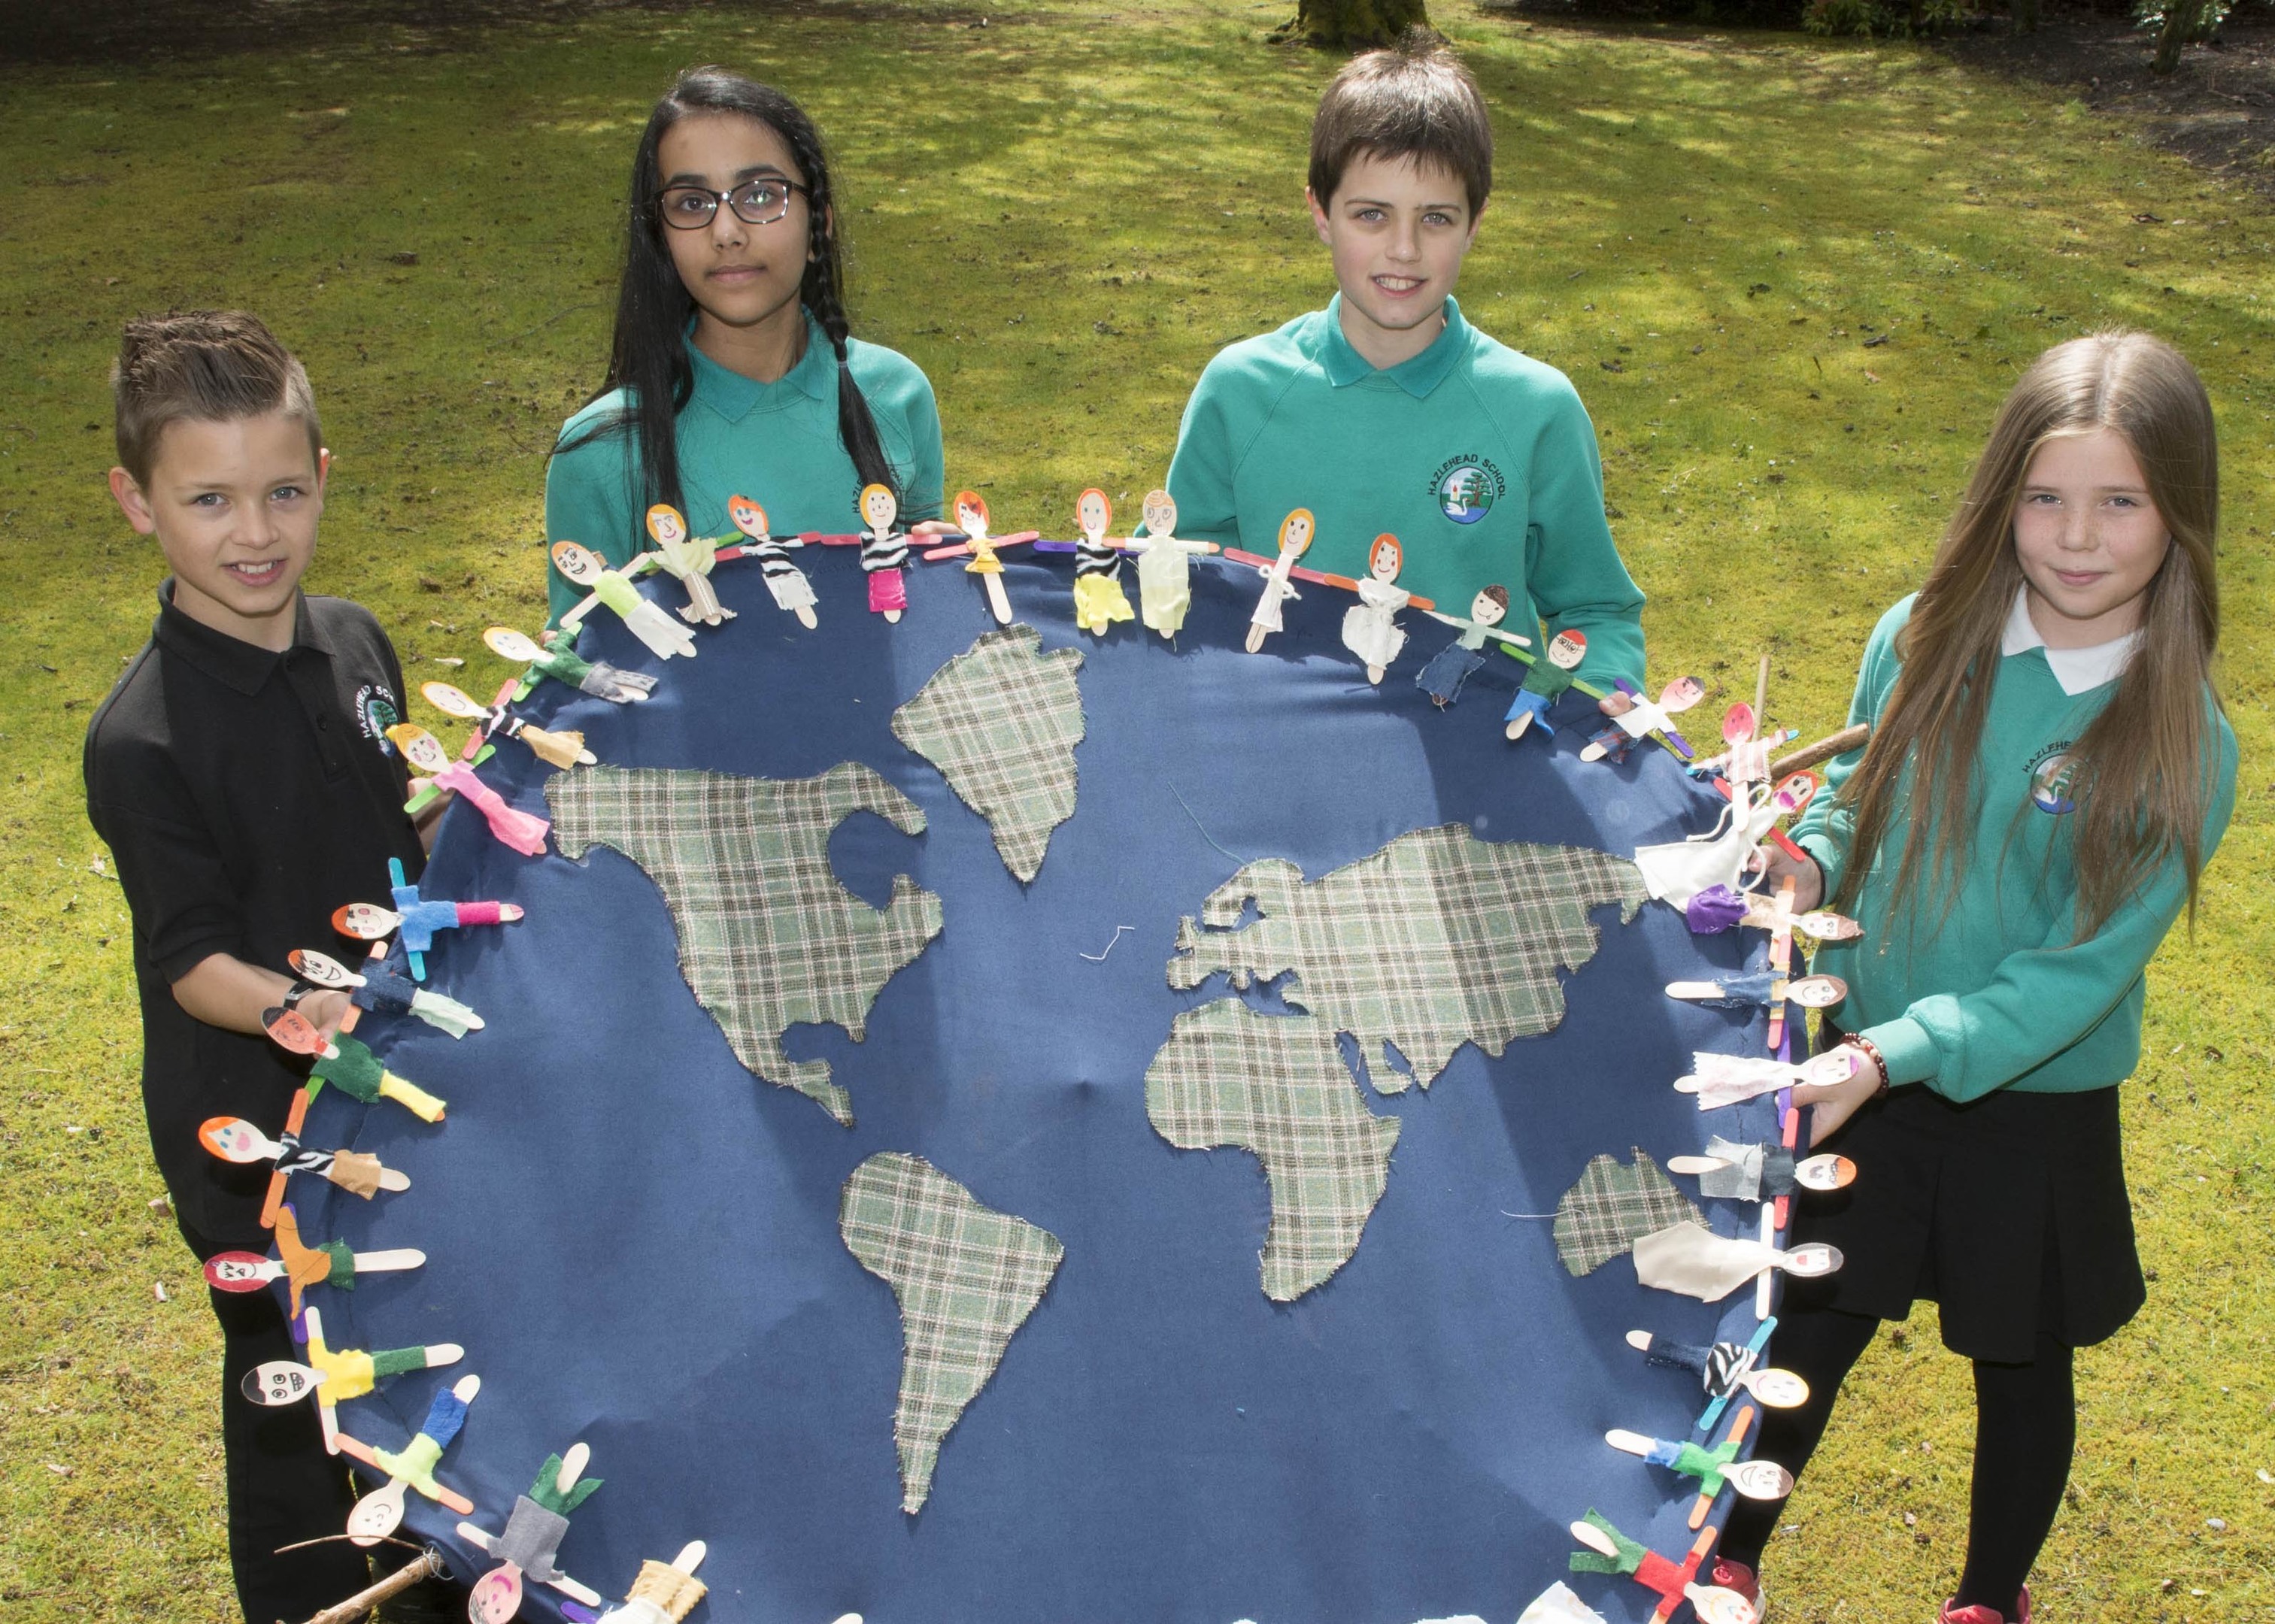 28/04/17 L-R Gregor Morison (10YO pr6),Hayfa Sheik (12YO pr7), Finlay Clubb (11YO pr7),Aaliyah Craig (11YO pr7)

The Global Group at Hazlehead School unveils its Global Goal sculpture trail at Hazlehead Park today. The school project aims to educate the community about the Global Goals as decided by the United Nations.  The sculpture trail, designed by and built by all the Primary School pupils, has 17 sculptures representing each of the 17 Global Goals.  All primary children have contributed to the sculptures.